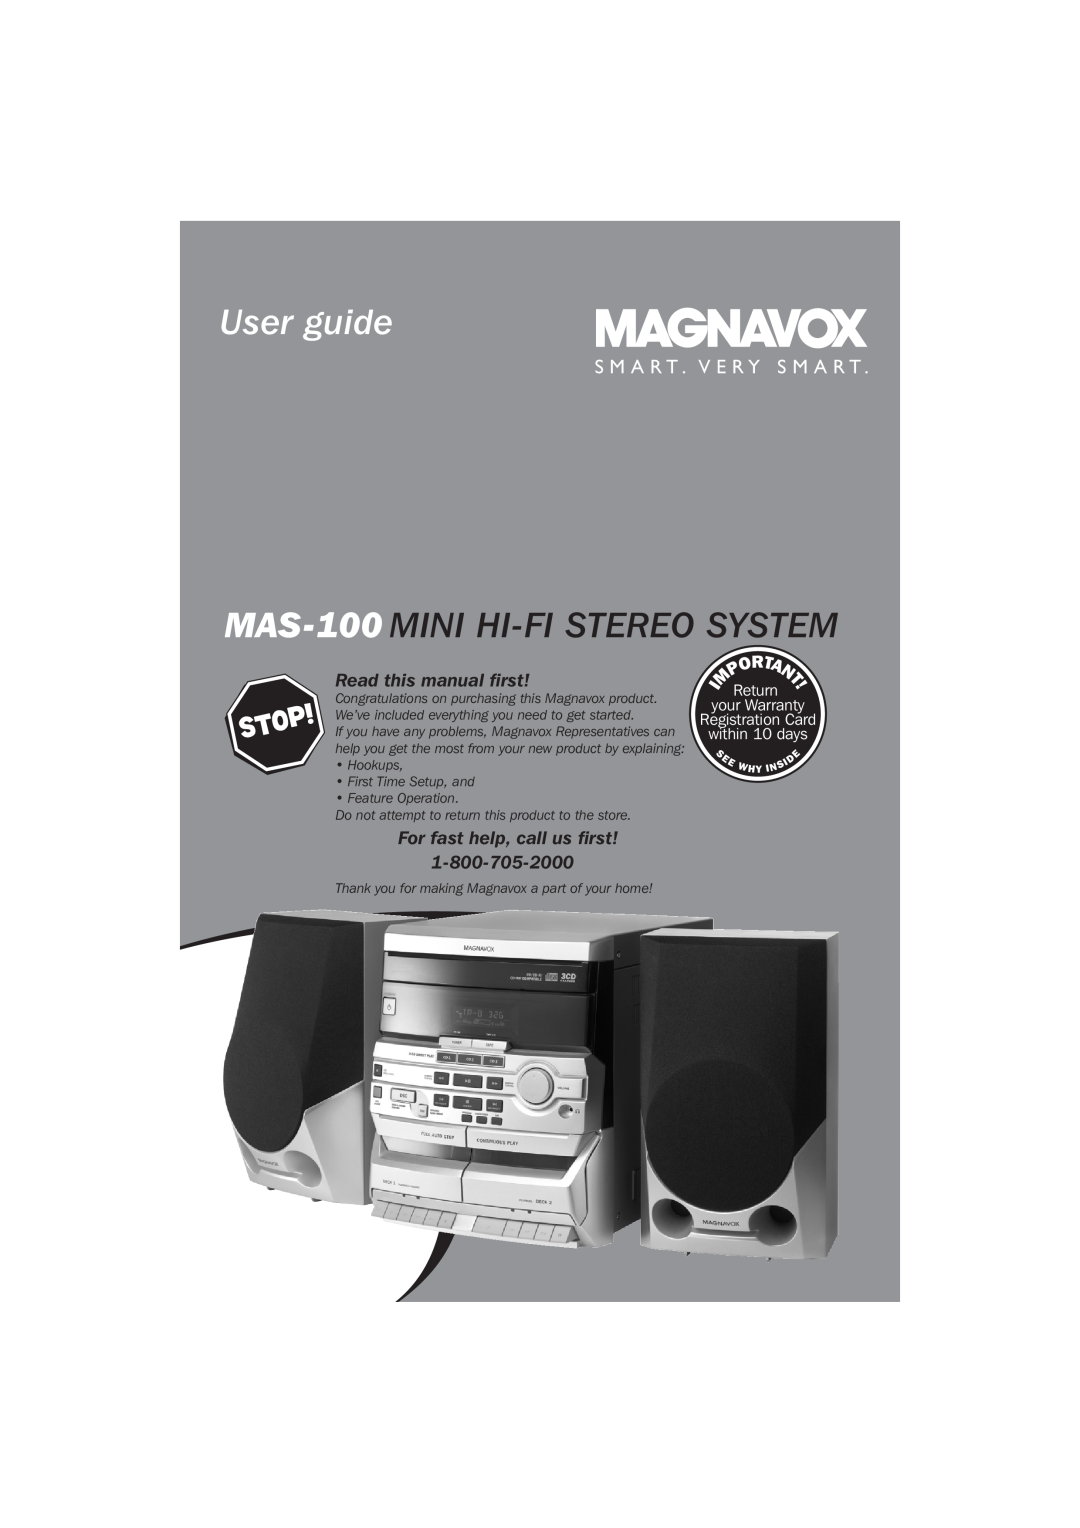 Magnavox MAS-100/37 warranty Read this manual ﬁrst, For fast help, call us ﬁrst, User guide, S M A R T . V E R Y S M A R T 